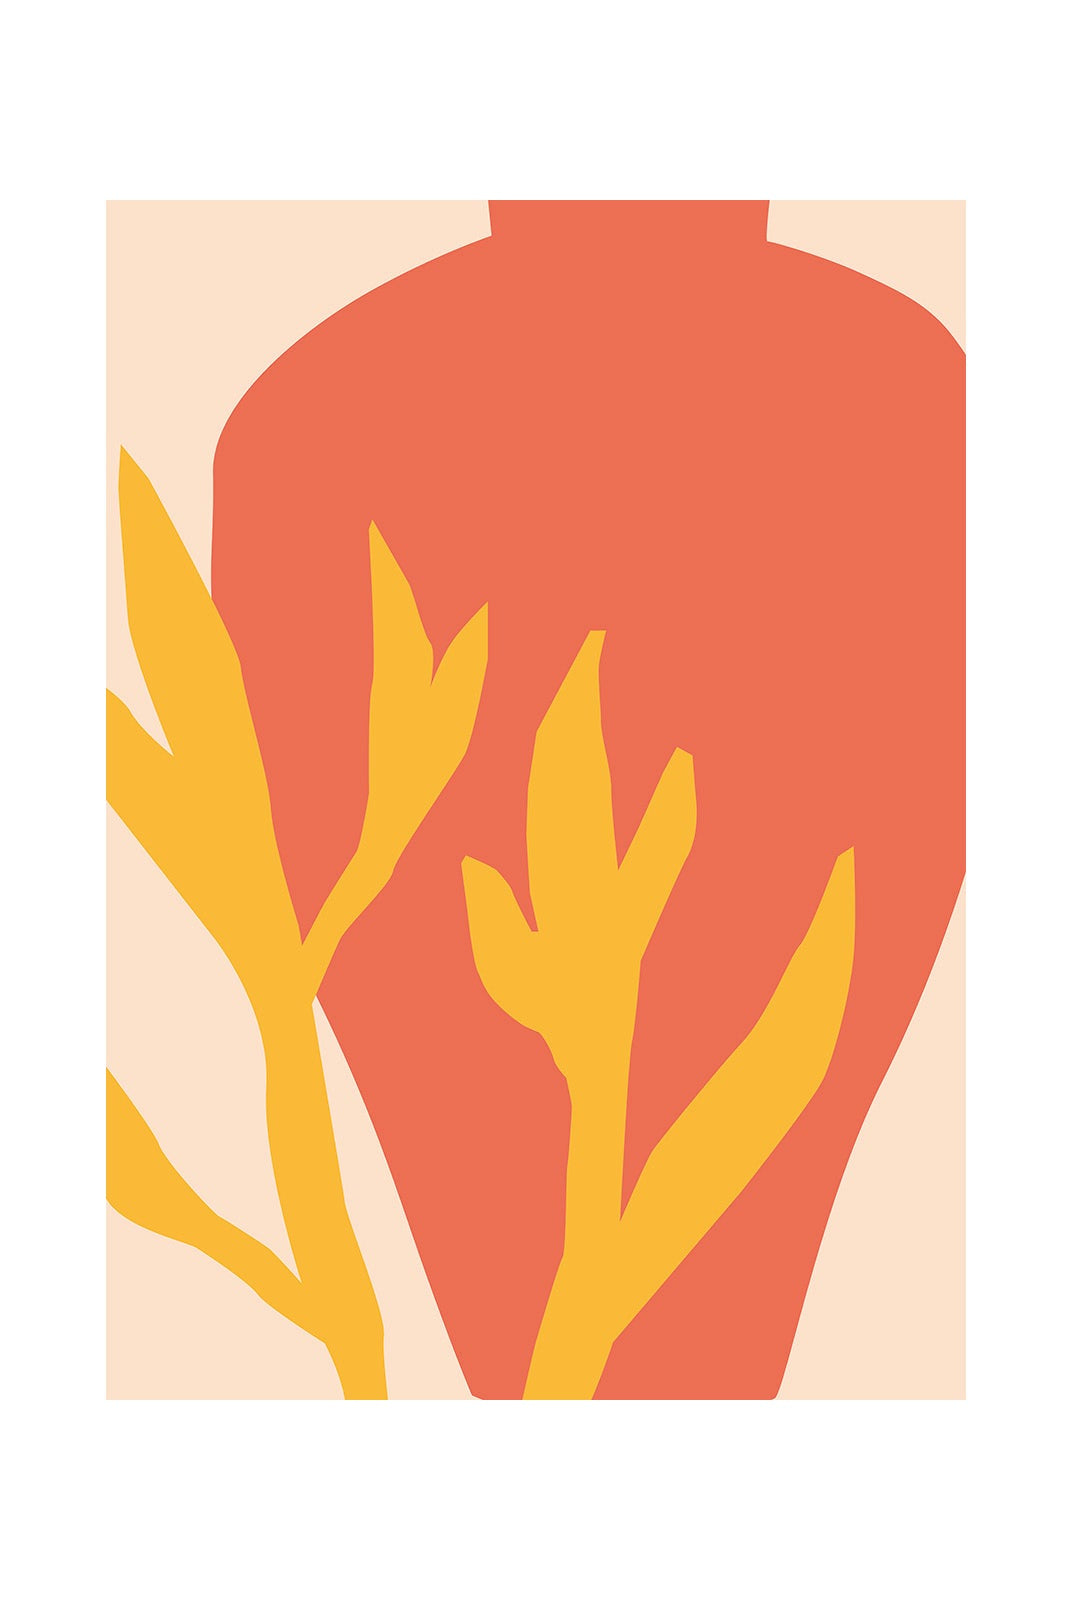 Flame of Growth